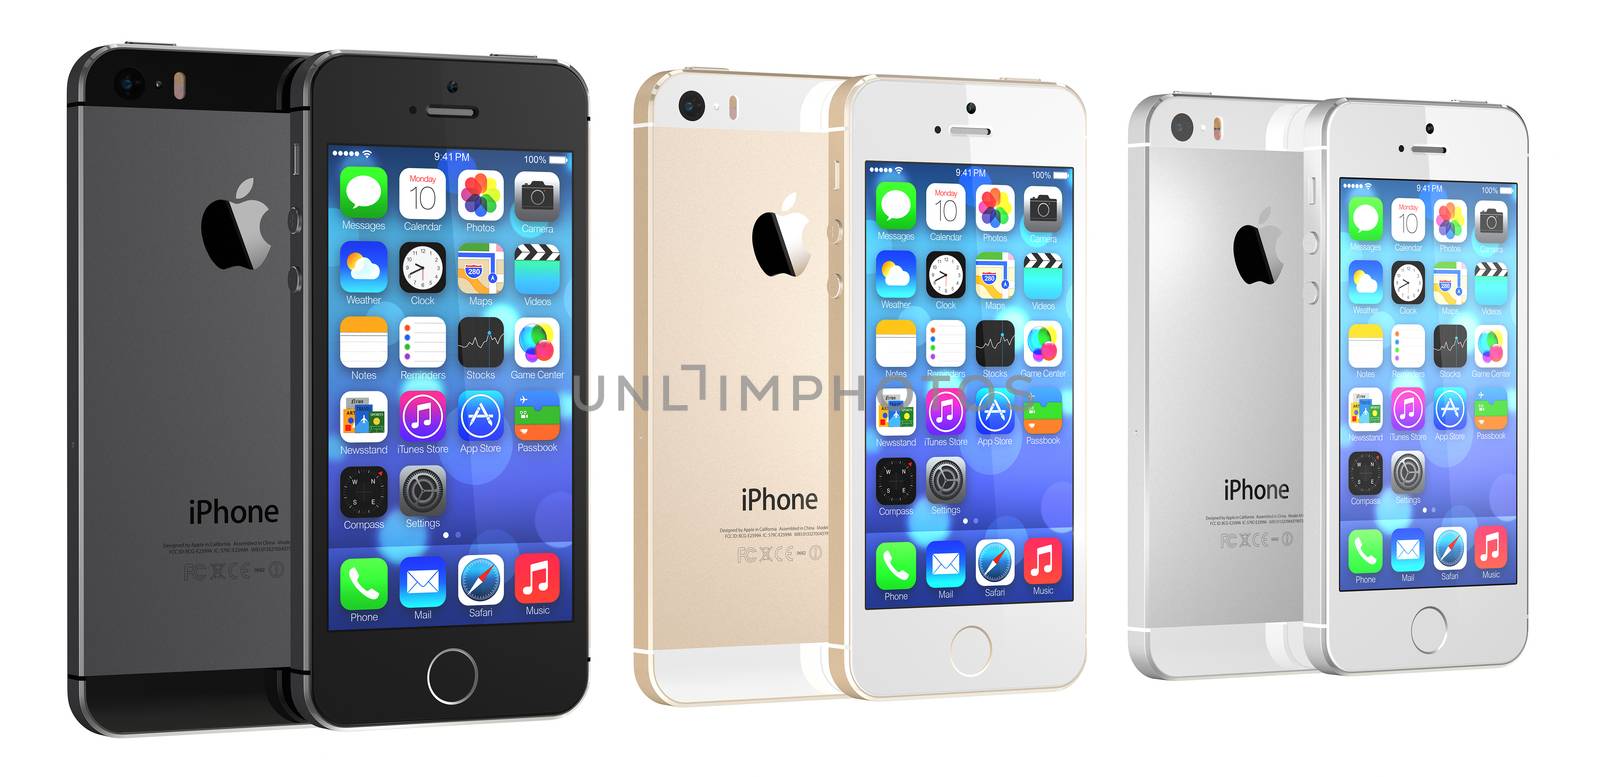 Space Gray, Gold and Silver iPhone 5s on white by manaemedia